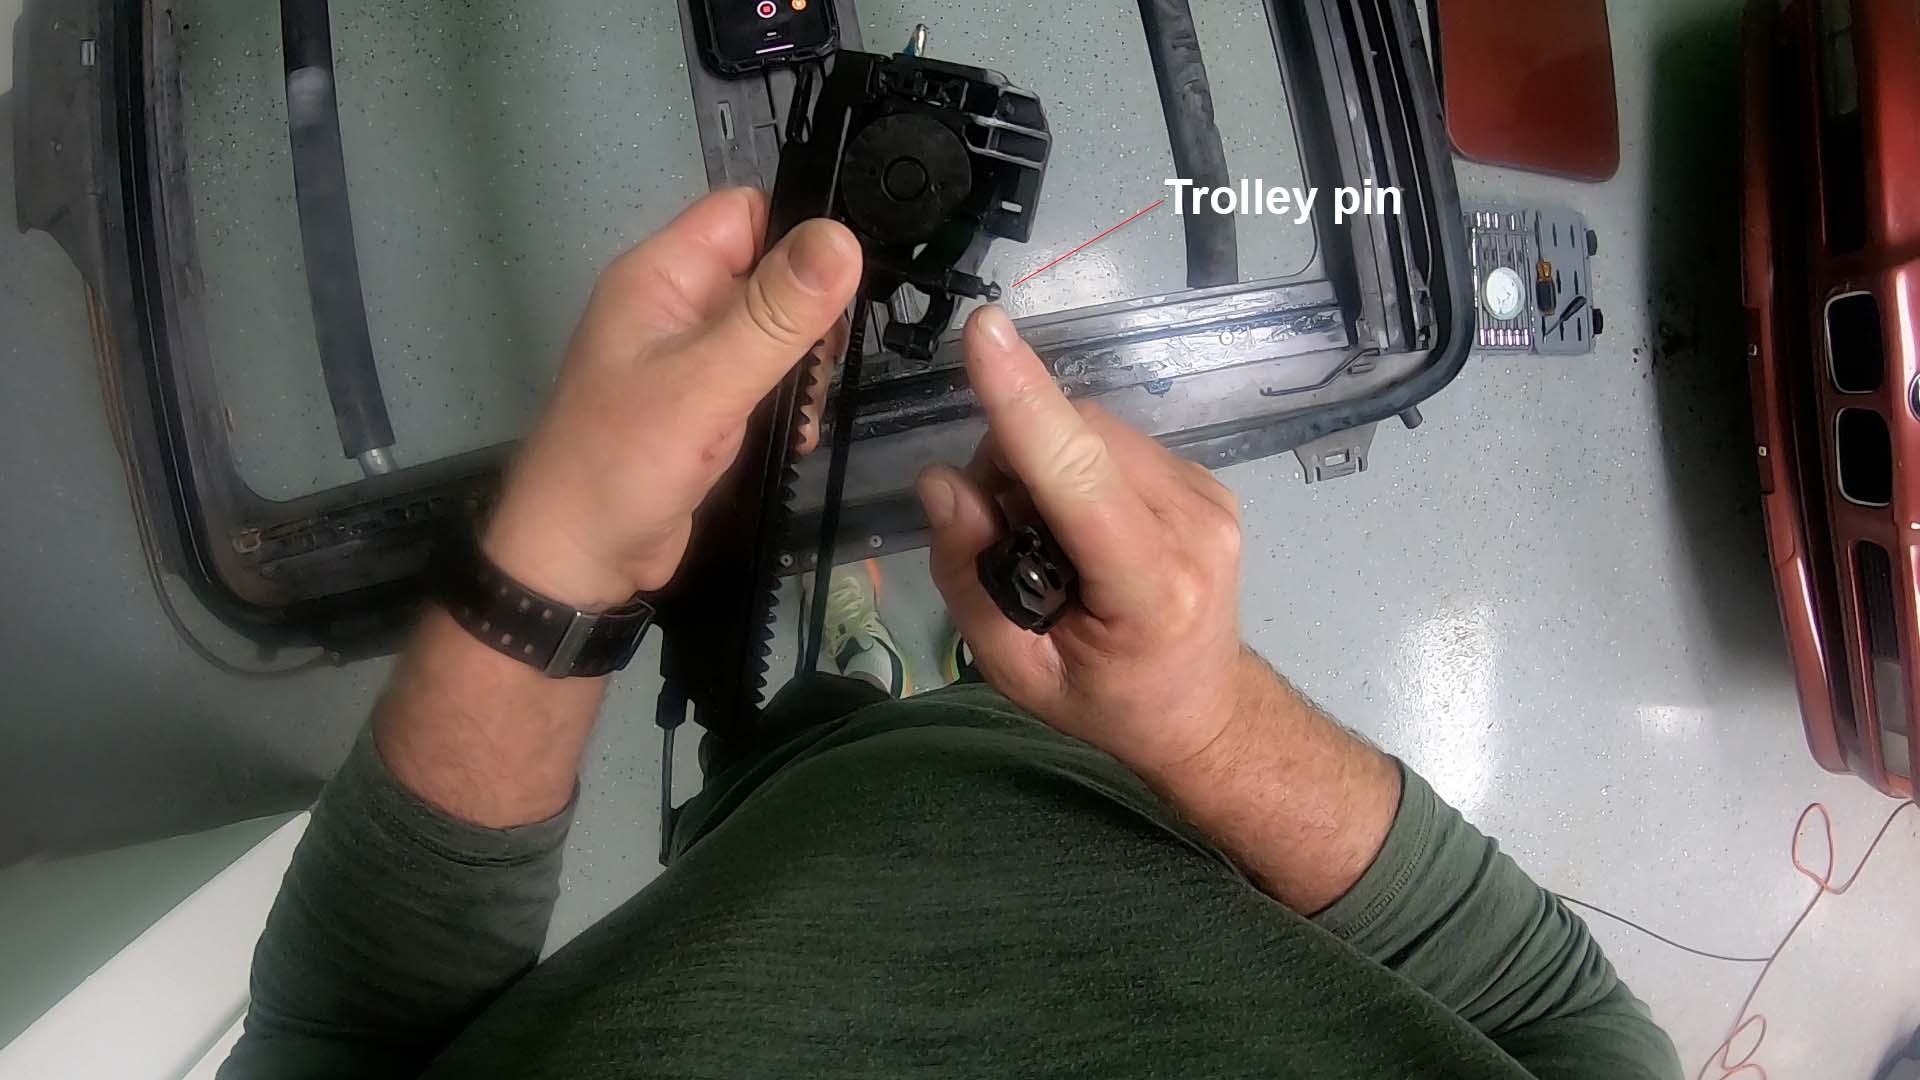 locate the trolley pin 